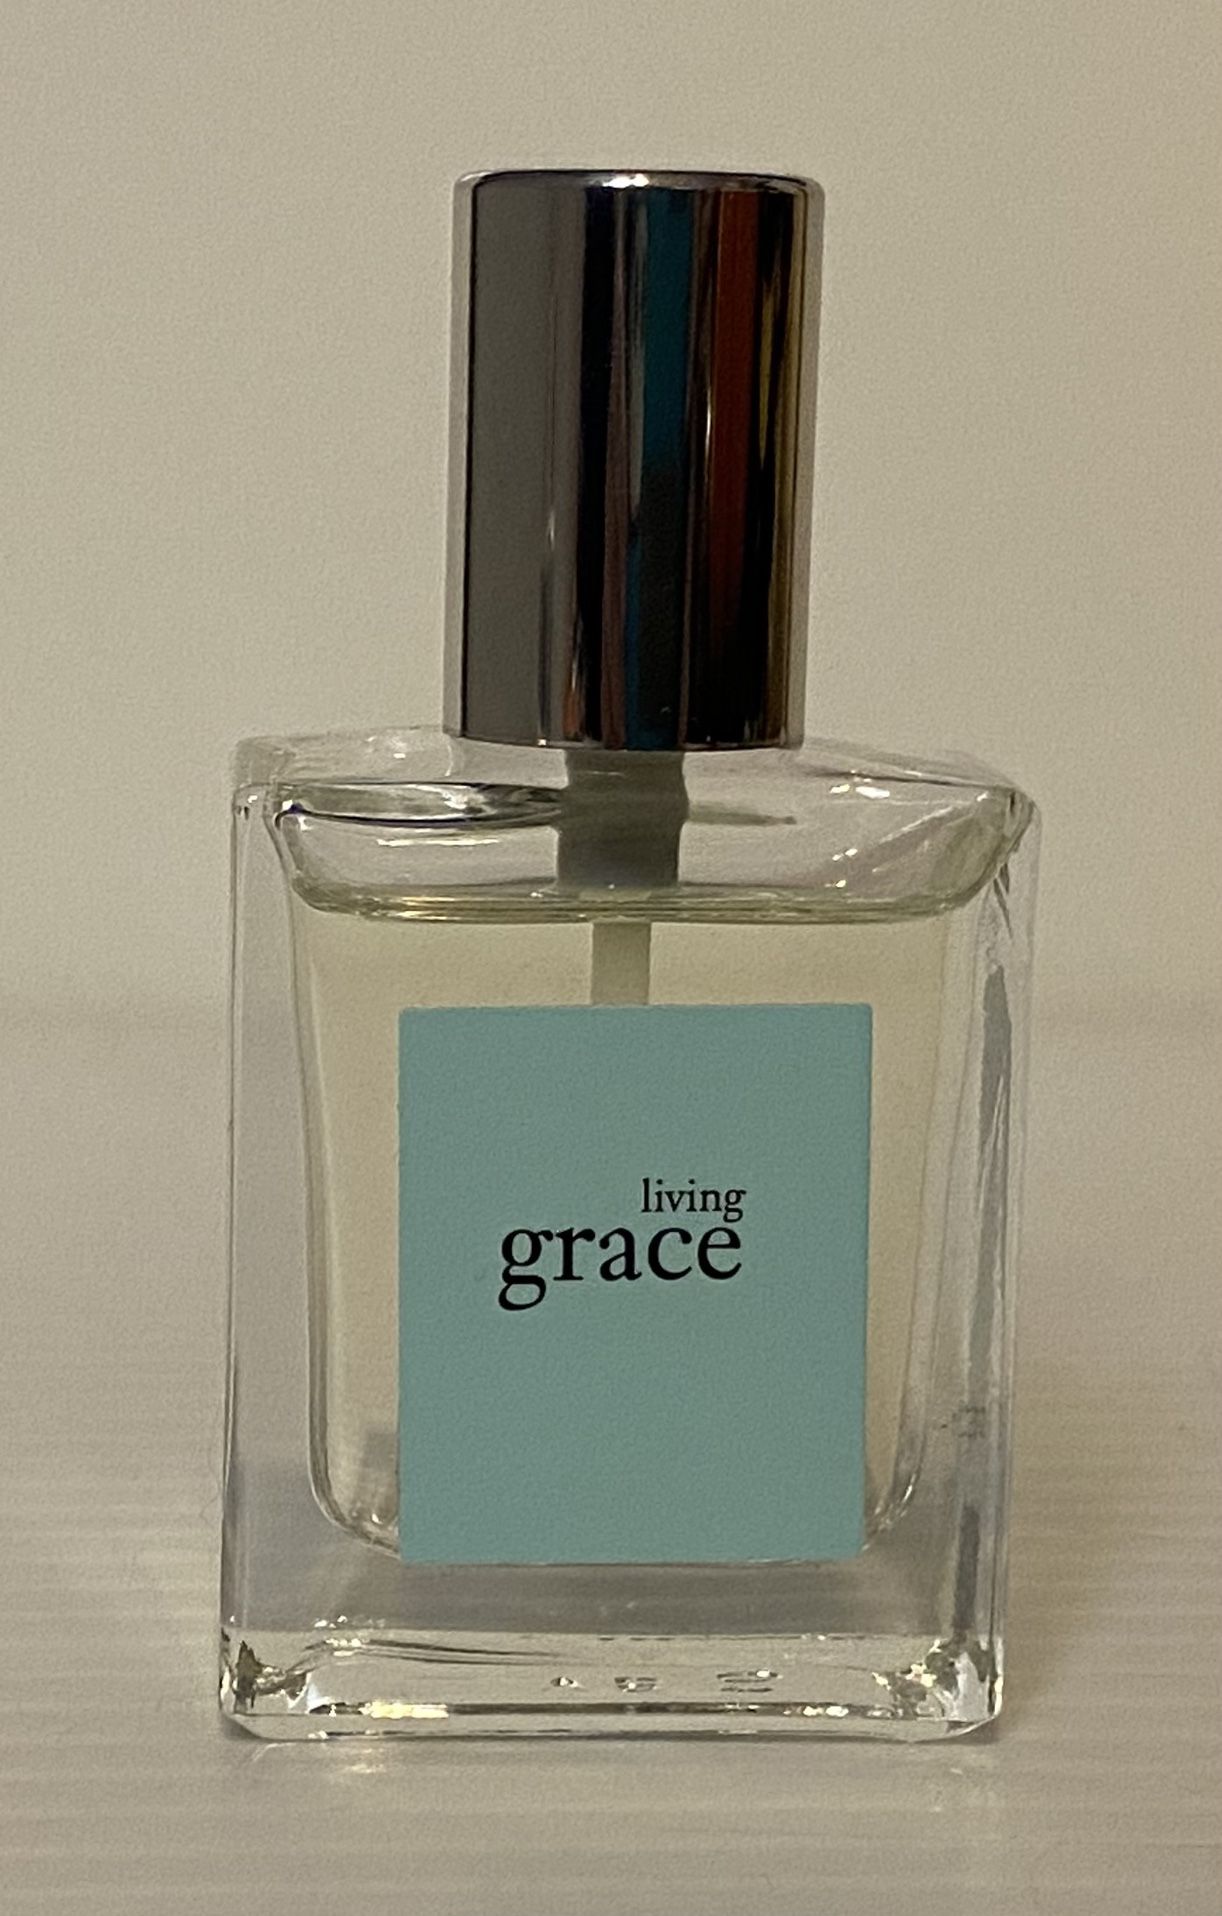 NEW .5oz Living Grace Perfume By Philosophy    24.00$ RETAIL 